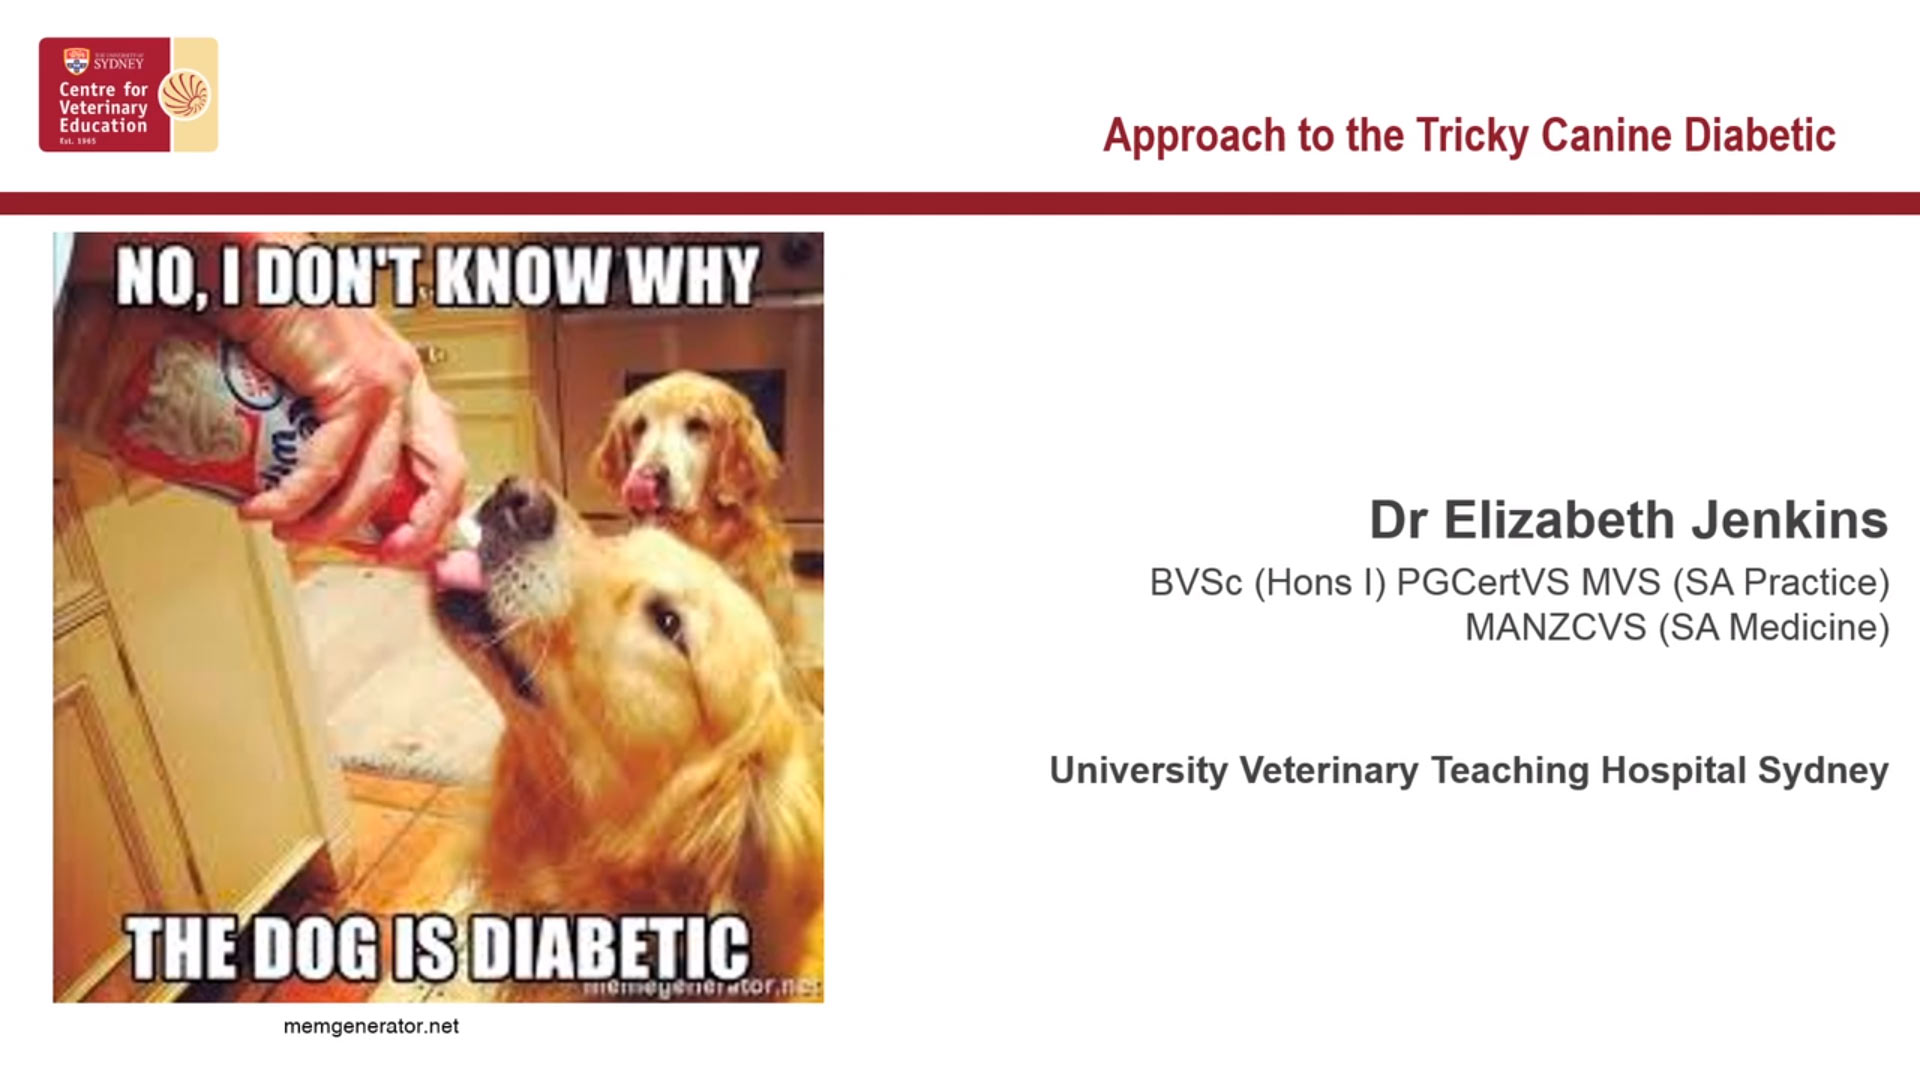 Approach to the tricky canine diabetic